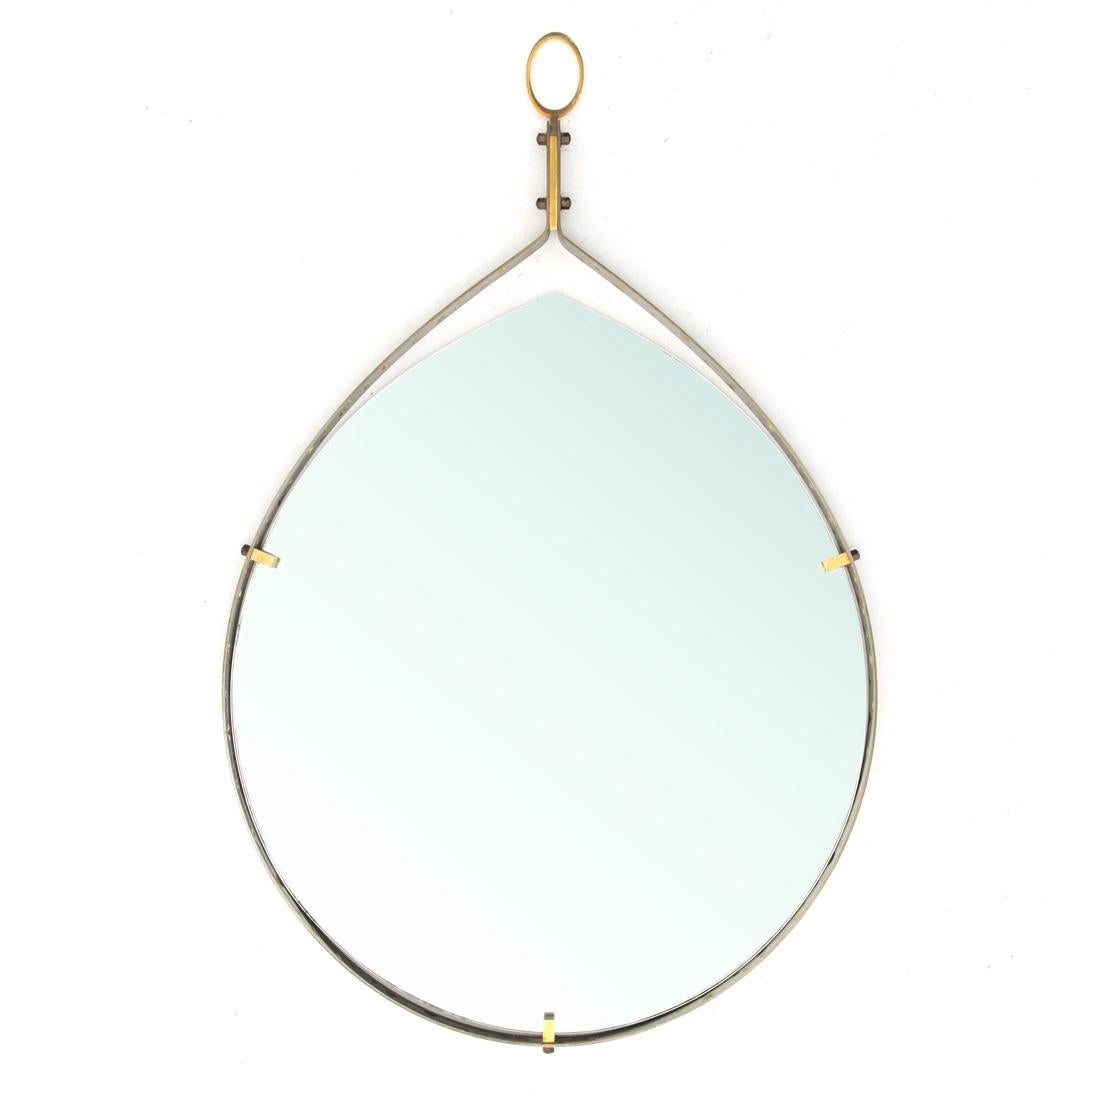 Italian manufacture mirror produced in the 1950s.
Burnished brass frame.
Hook and mirror block, in brass.
Drop-shaped mirror
Good general conditions, some signs due to normal use over time.

Dimensions: Length 43 cm, depth 2.5 cm, height 72 cm.